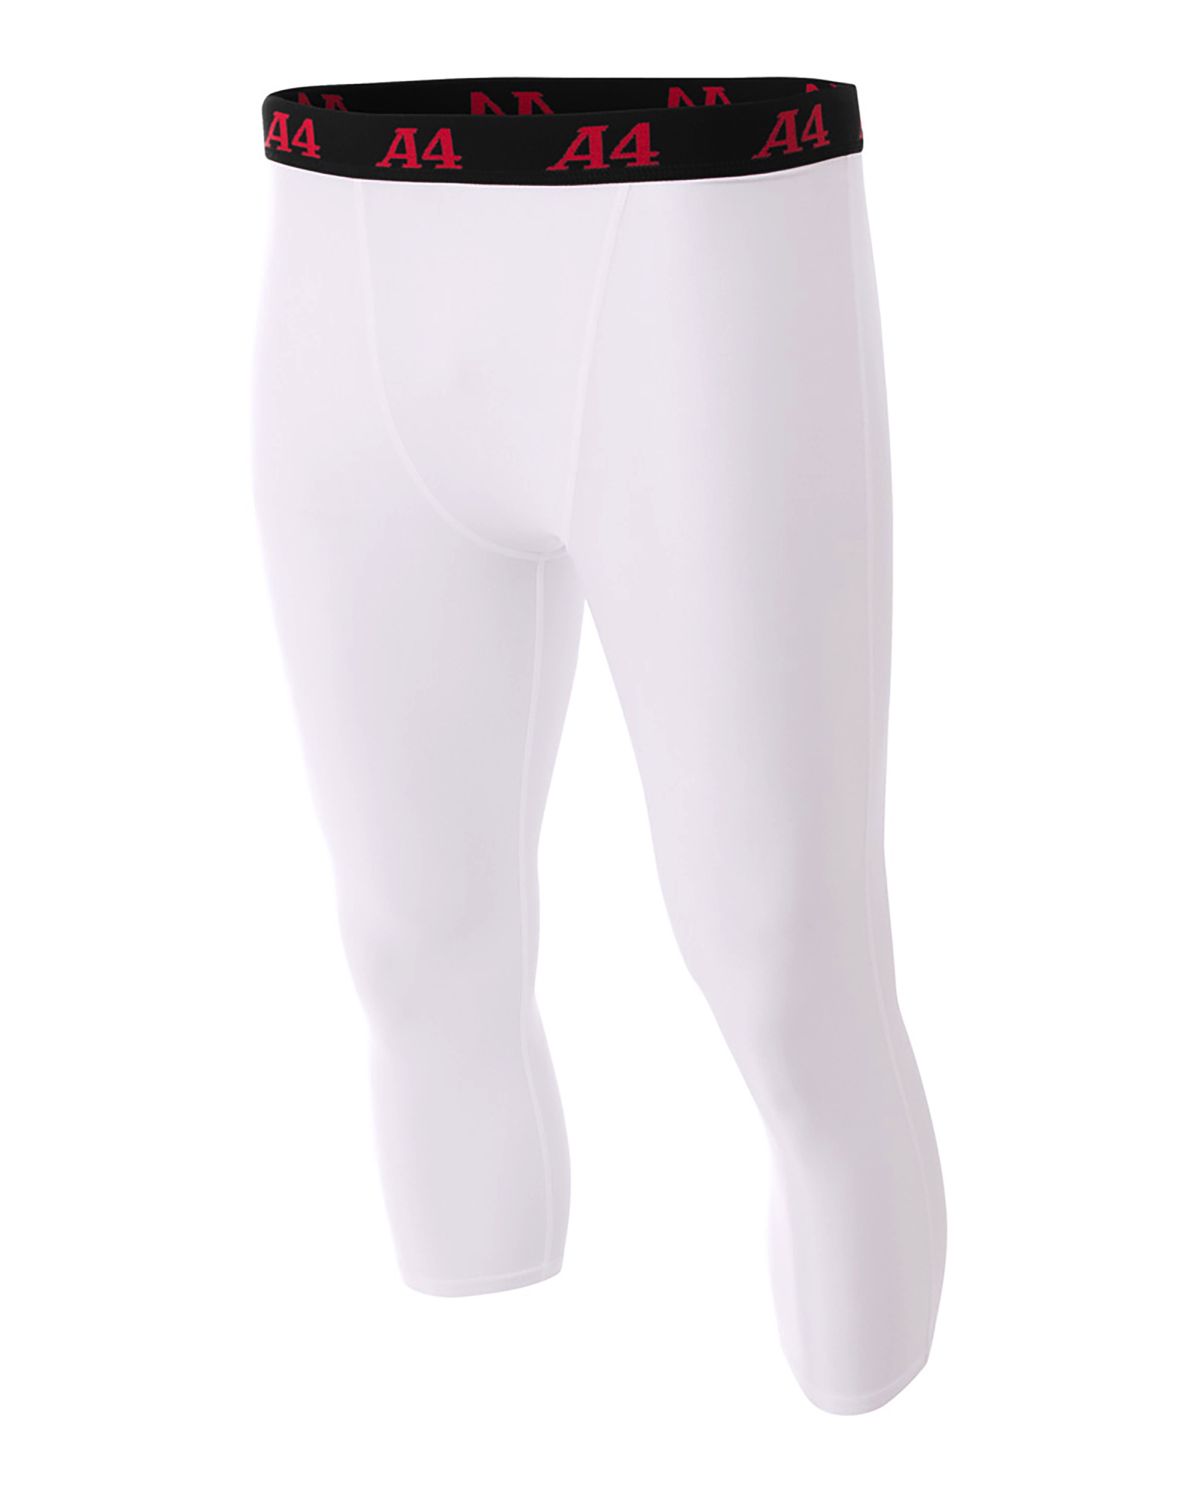 'A4 N6202 Adult Polyester/Spandex Compression Tight'